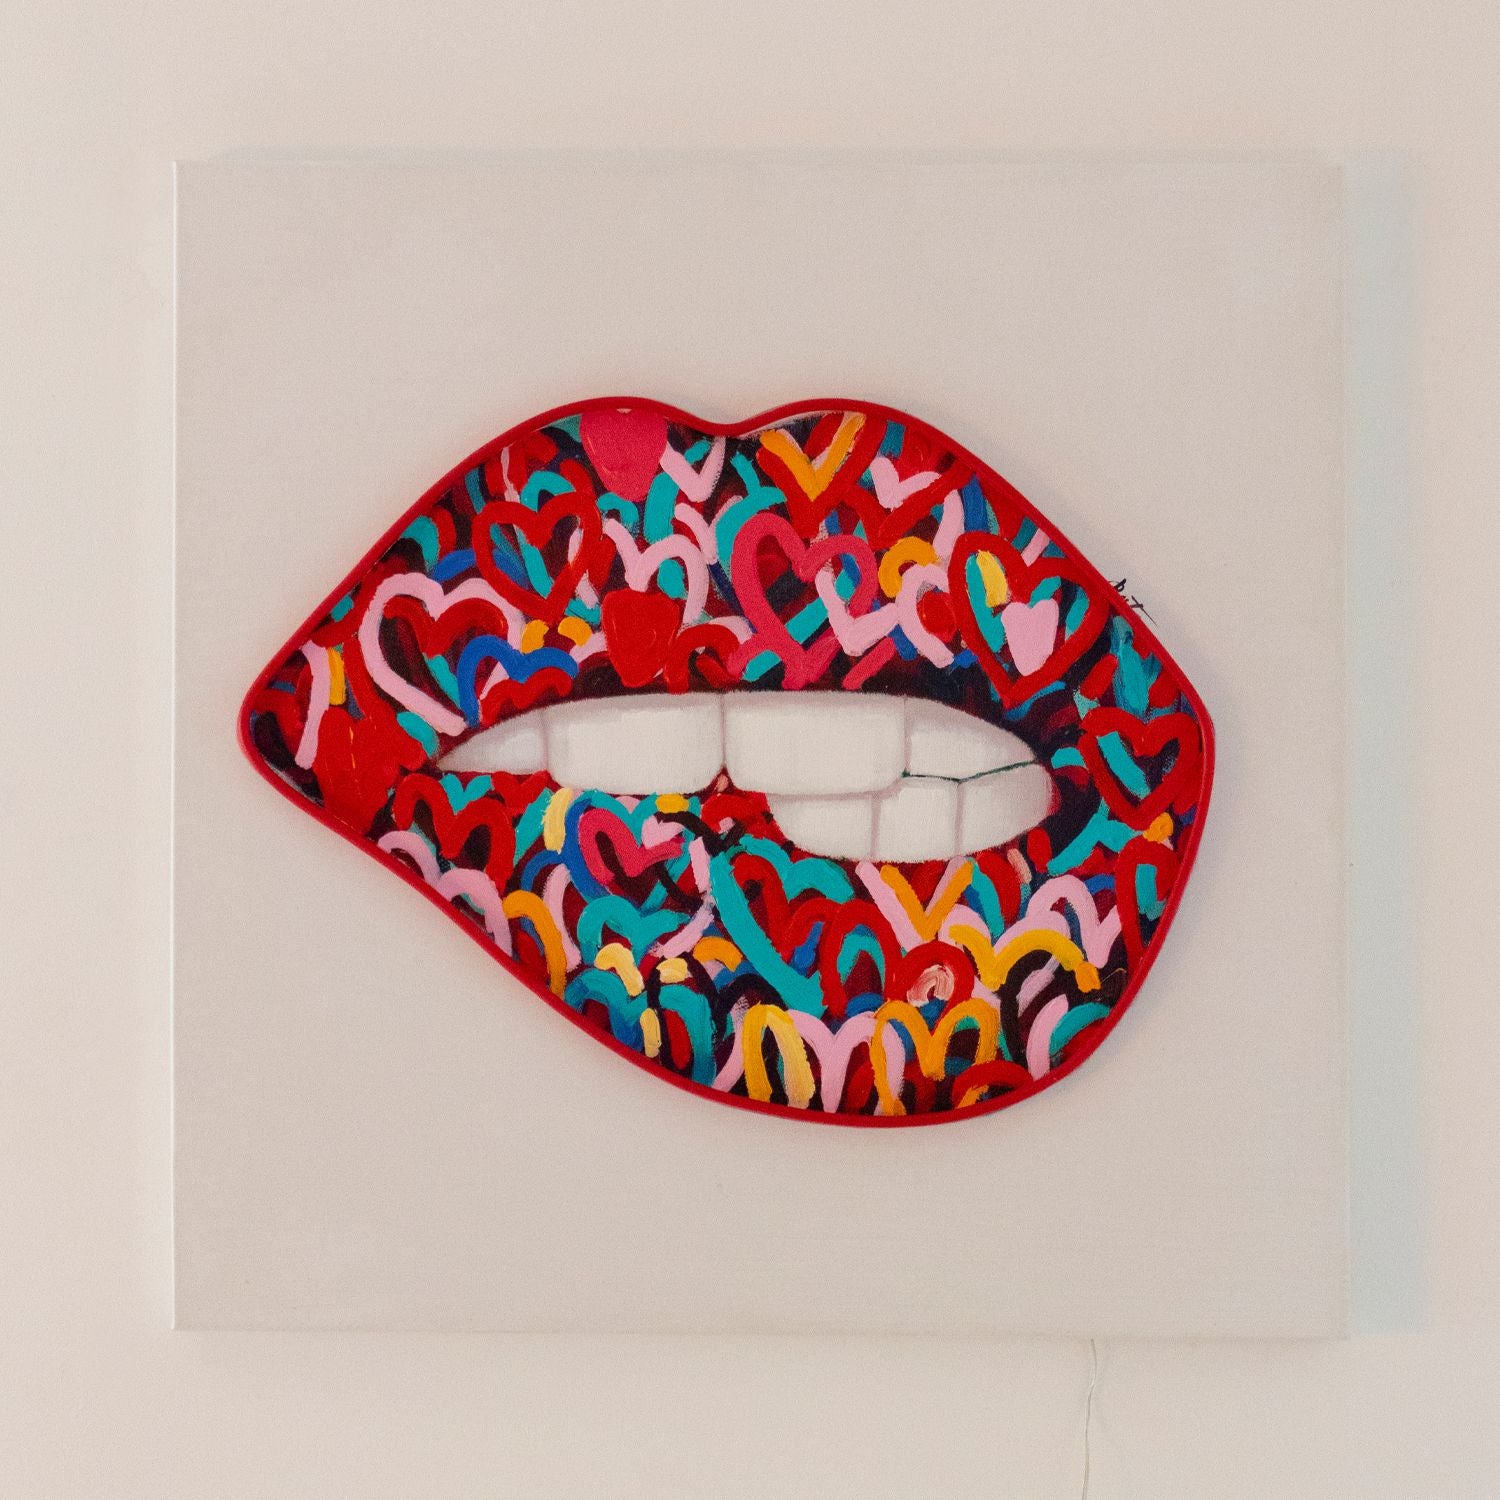 Mouth LED Neon Painting - Small